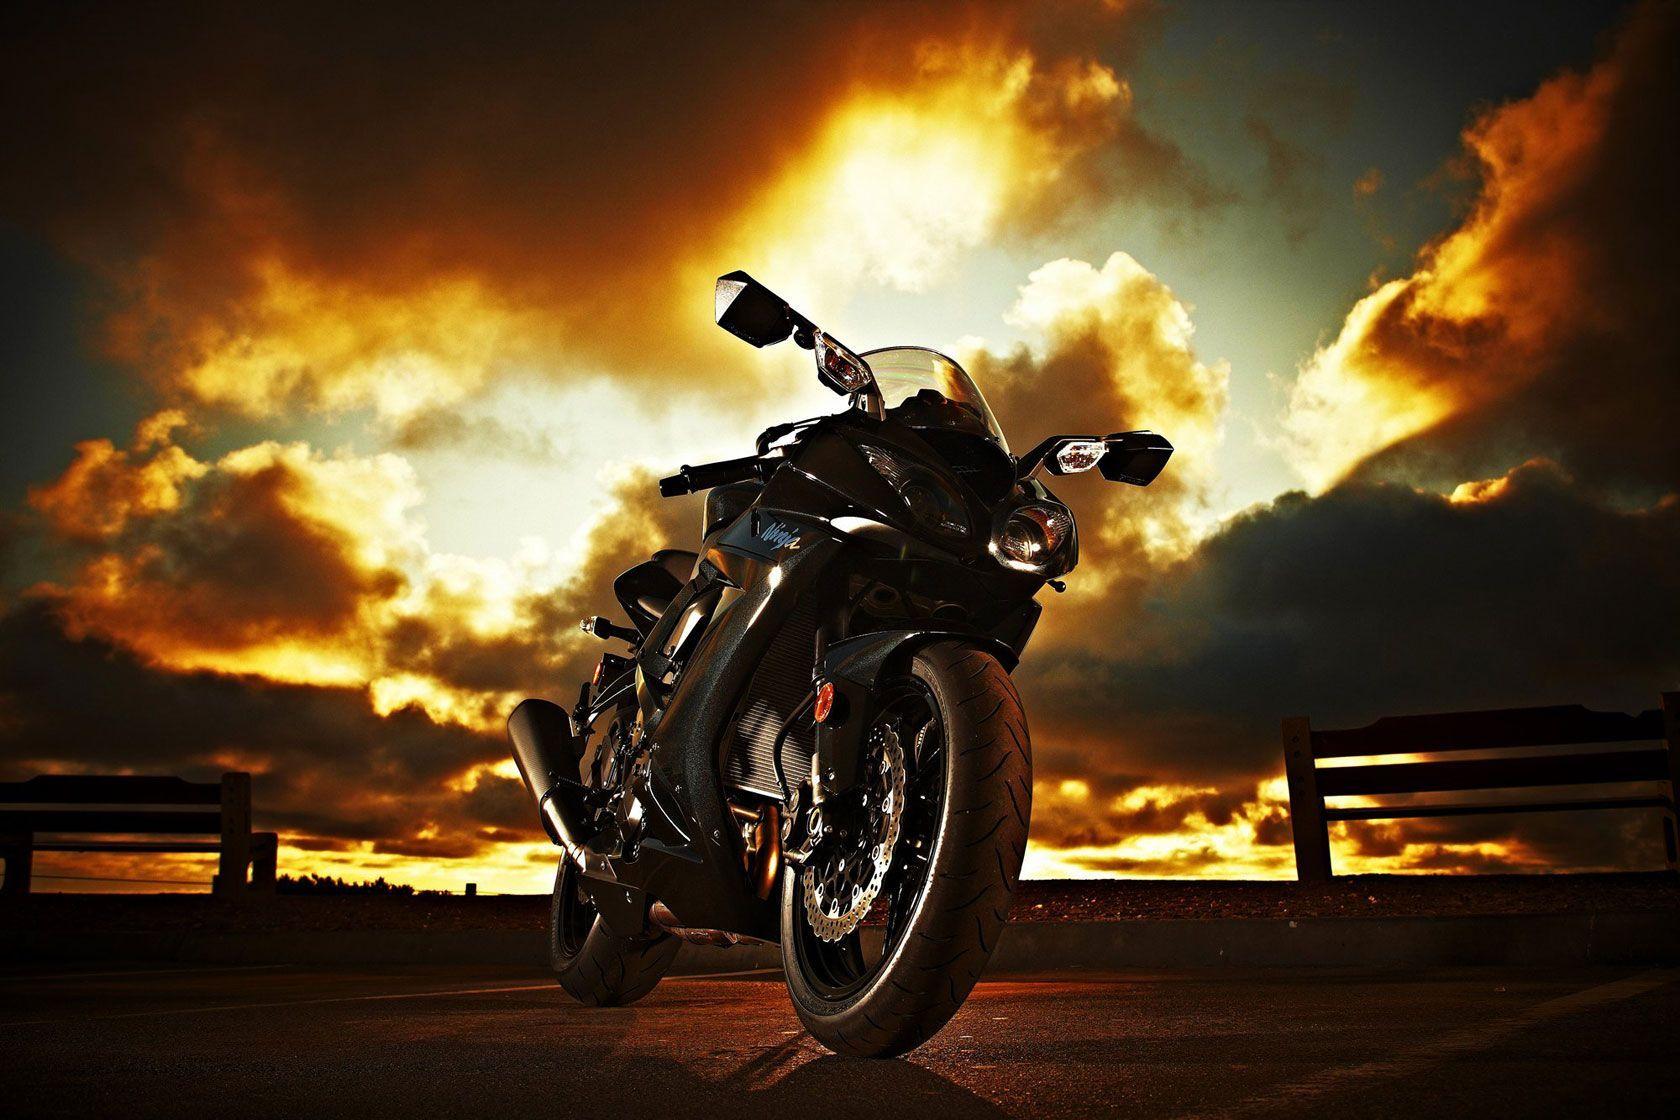 Motorcycle Wallpaper Collection For Free Download. HD Wallpaper